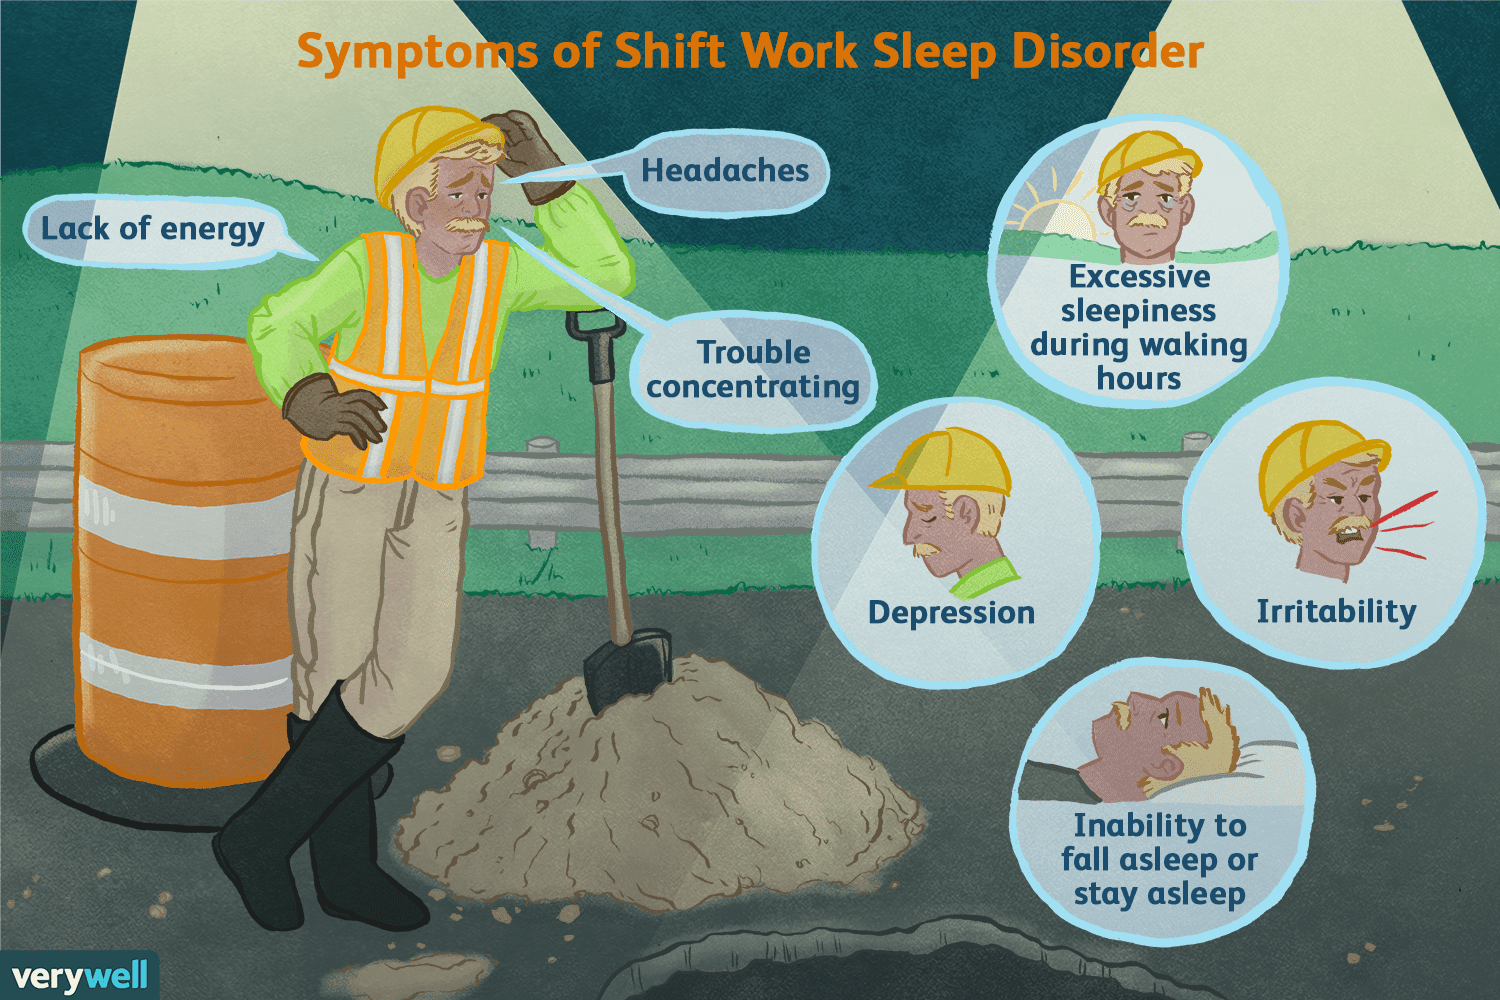 How can shift work affect sleep patterns and lead to sleep disorders?